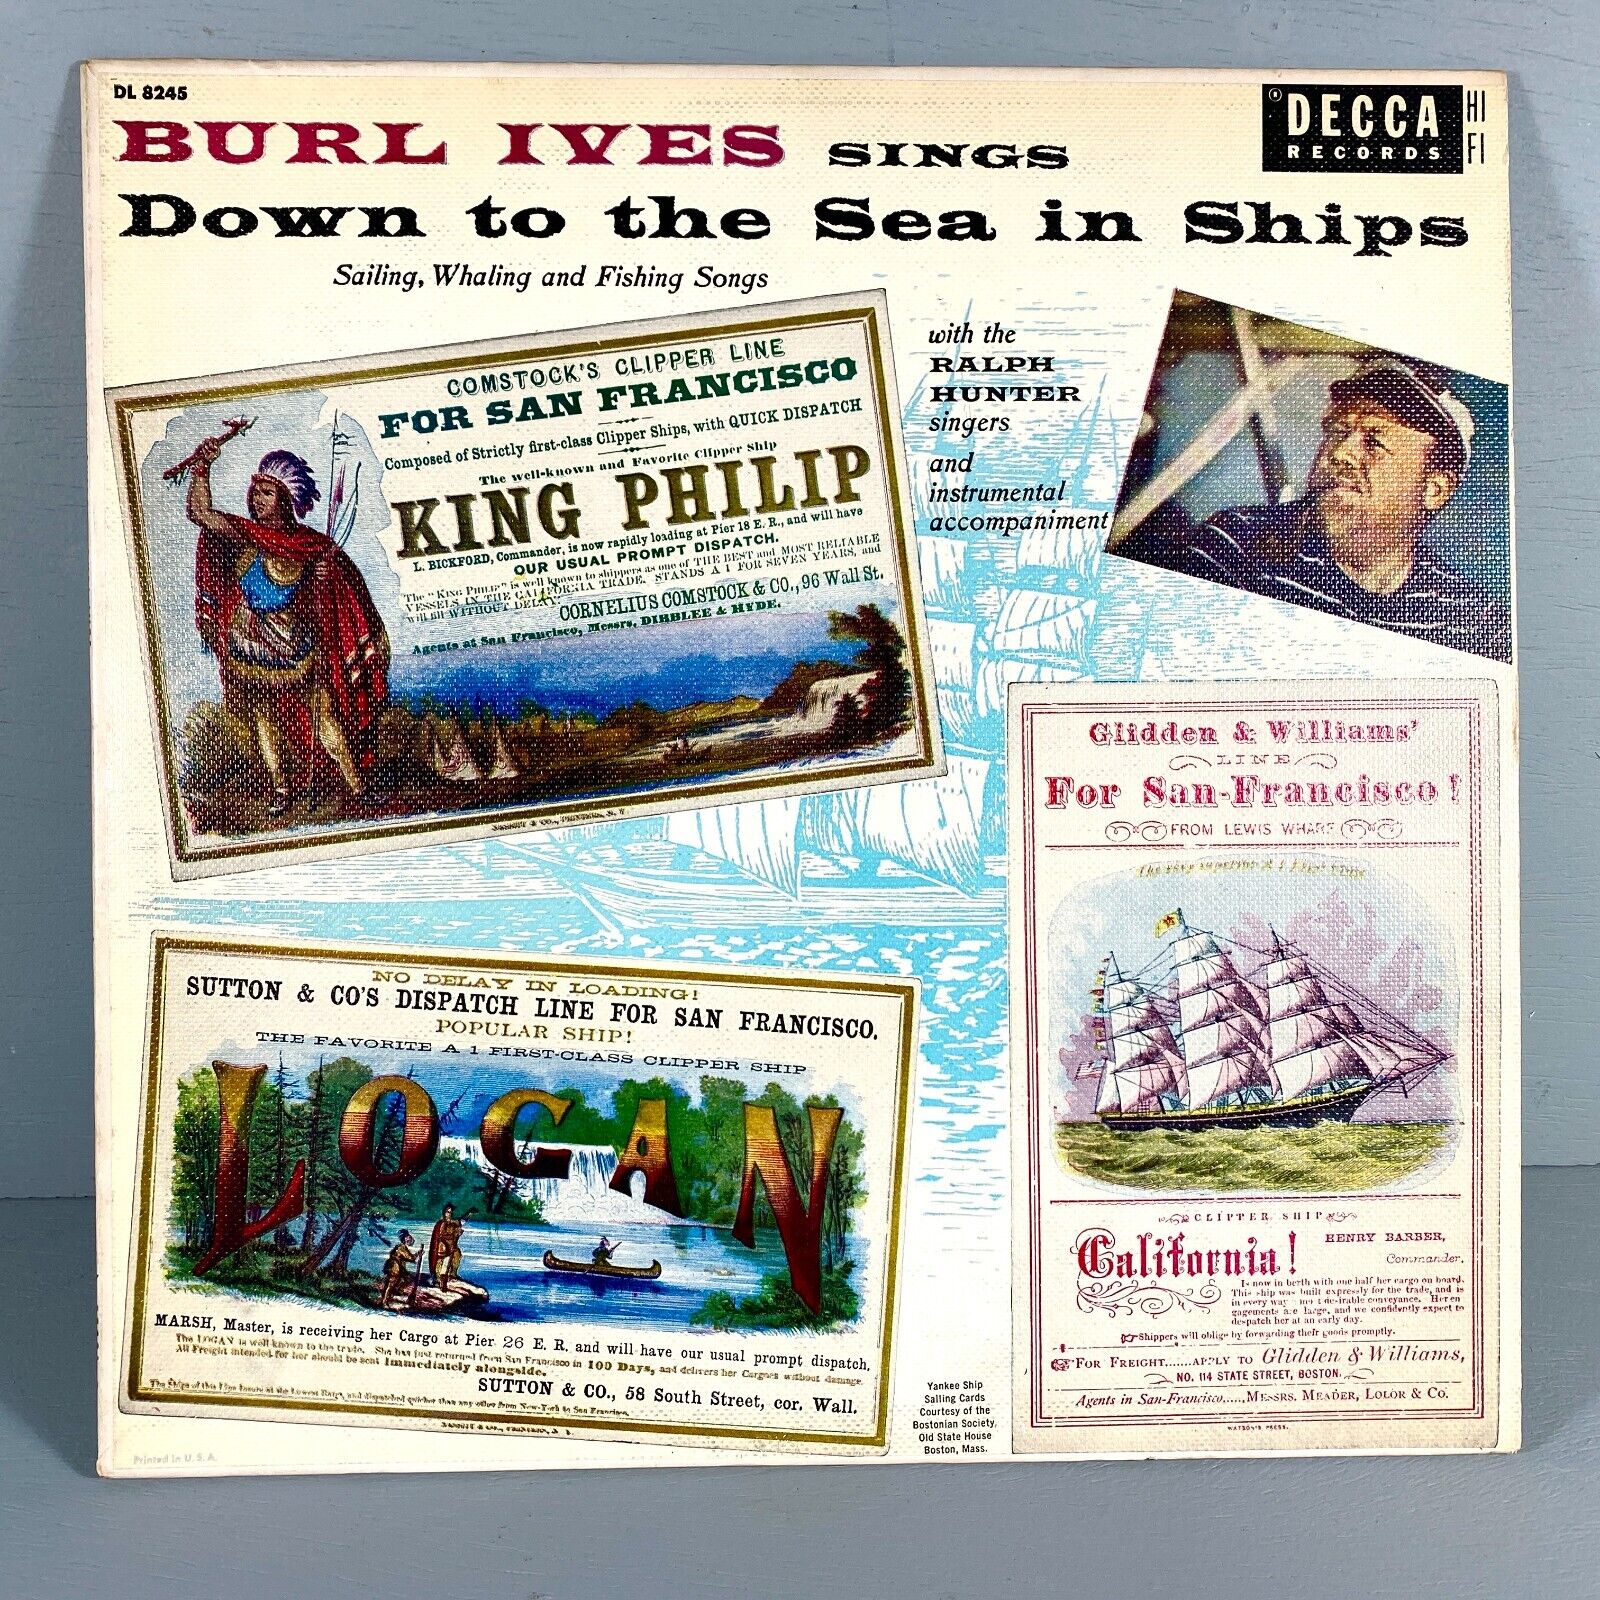 Burl Ives Sings Down to the Sea in Ships Vinyl LP ~ Decca Records  DL 8245 ~ VG+